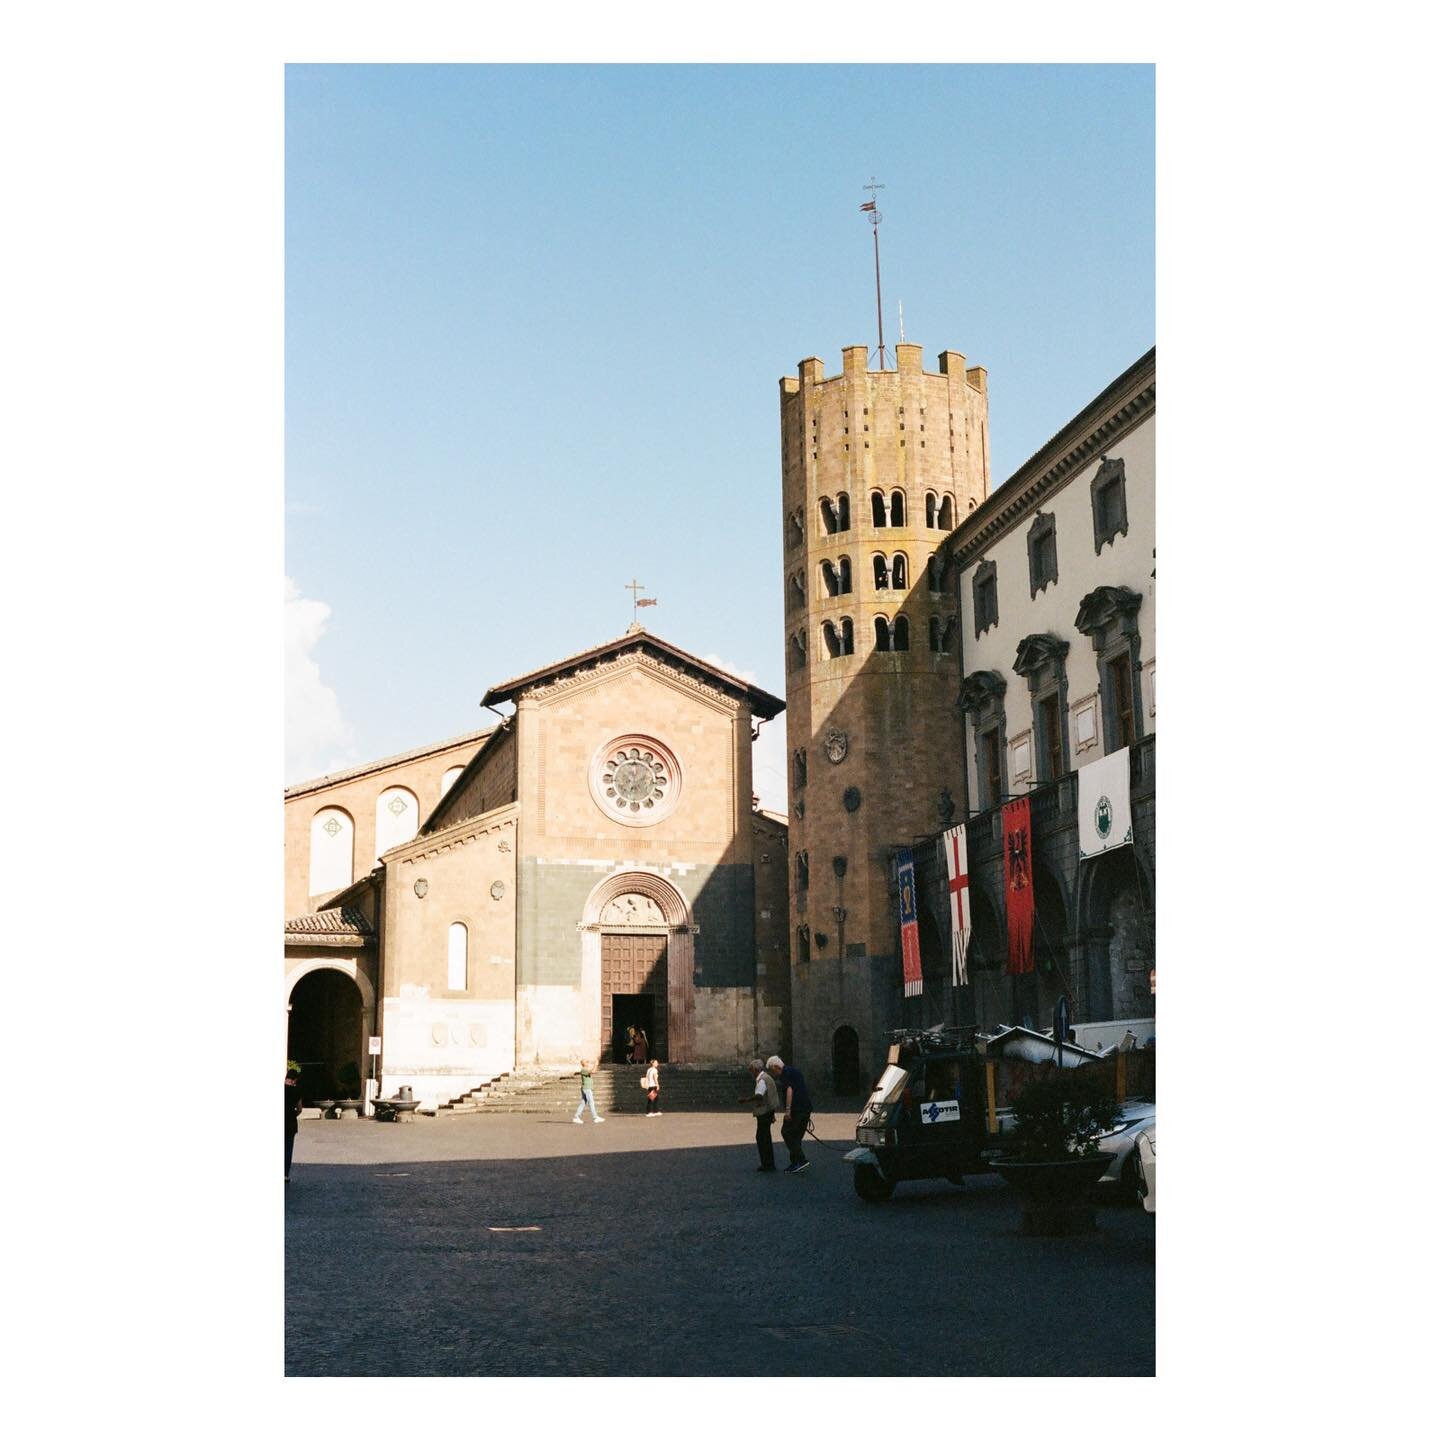 from the streets of Orvieto
.
don&rsquo;t forget to stop by @trattoriadacarloreal for the best food in Orvieto 
.
.
.
Orvieto, Italy
July 2022
.
#orvieto #italia #filmphotography #kodak #kodakportra #kodakportra400 #workaway #workawayadventure #35mm 